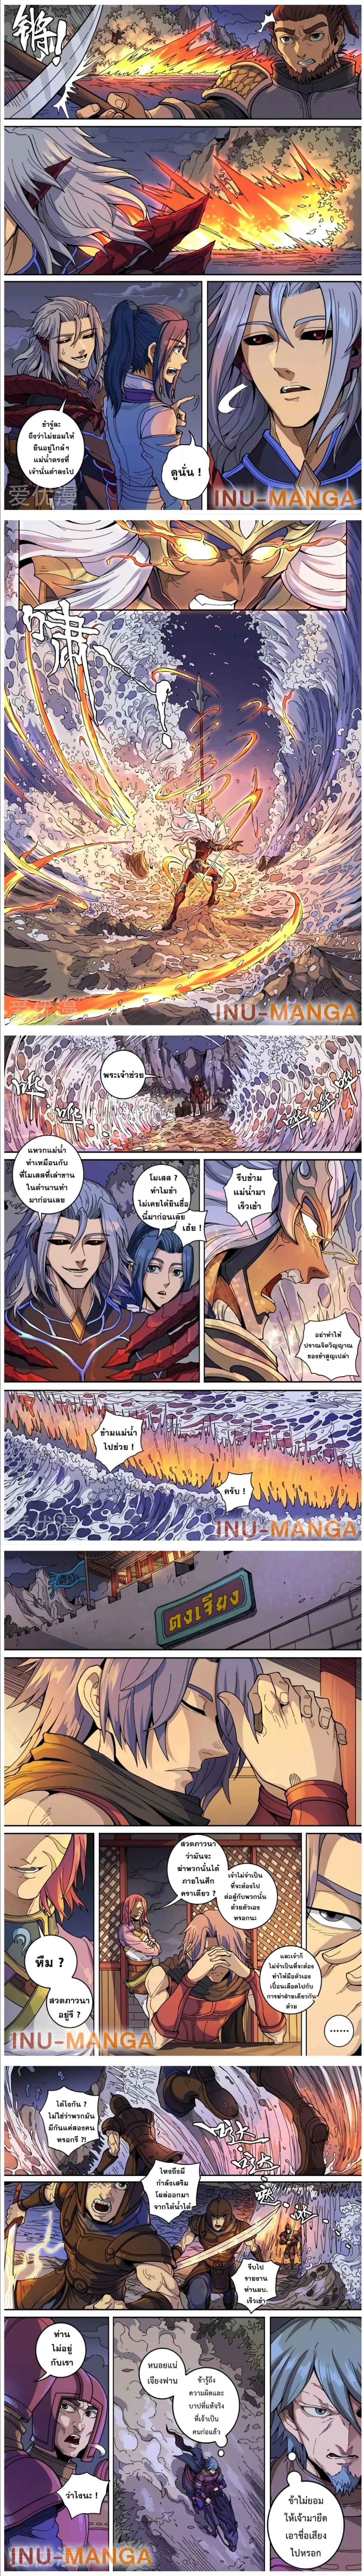 Tangyan in The Other World 134 (4)